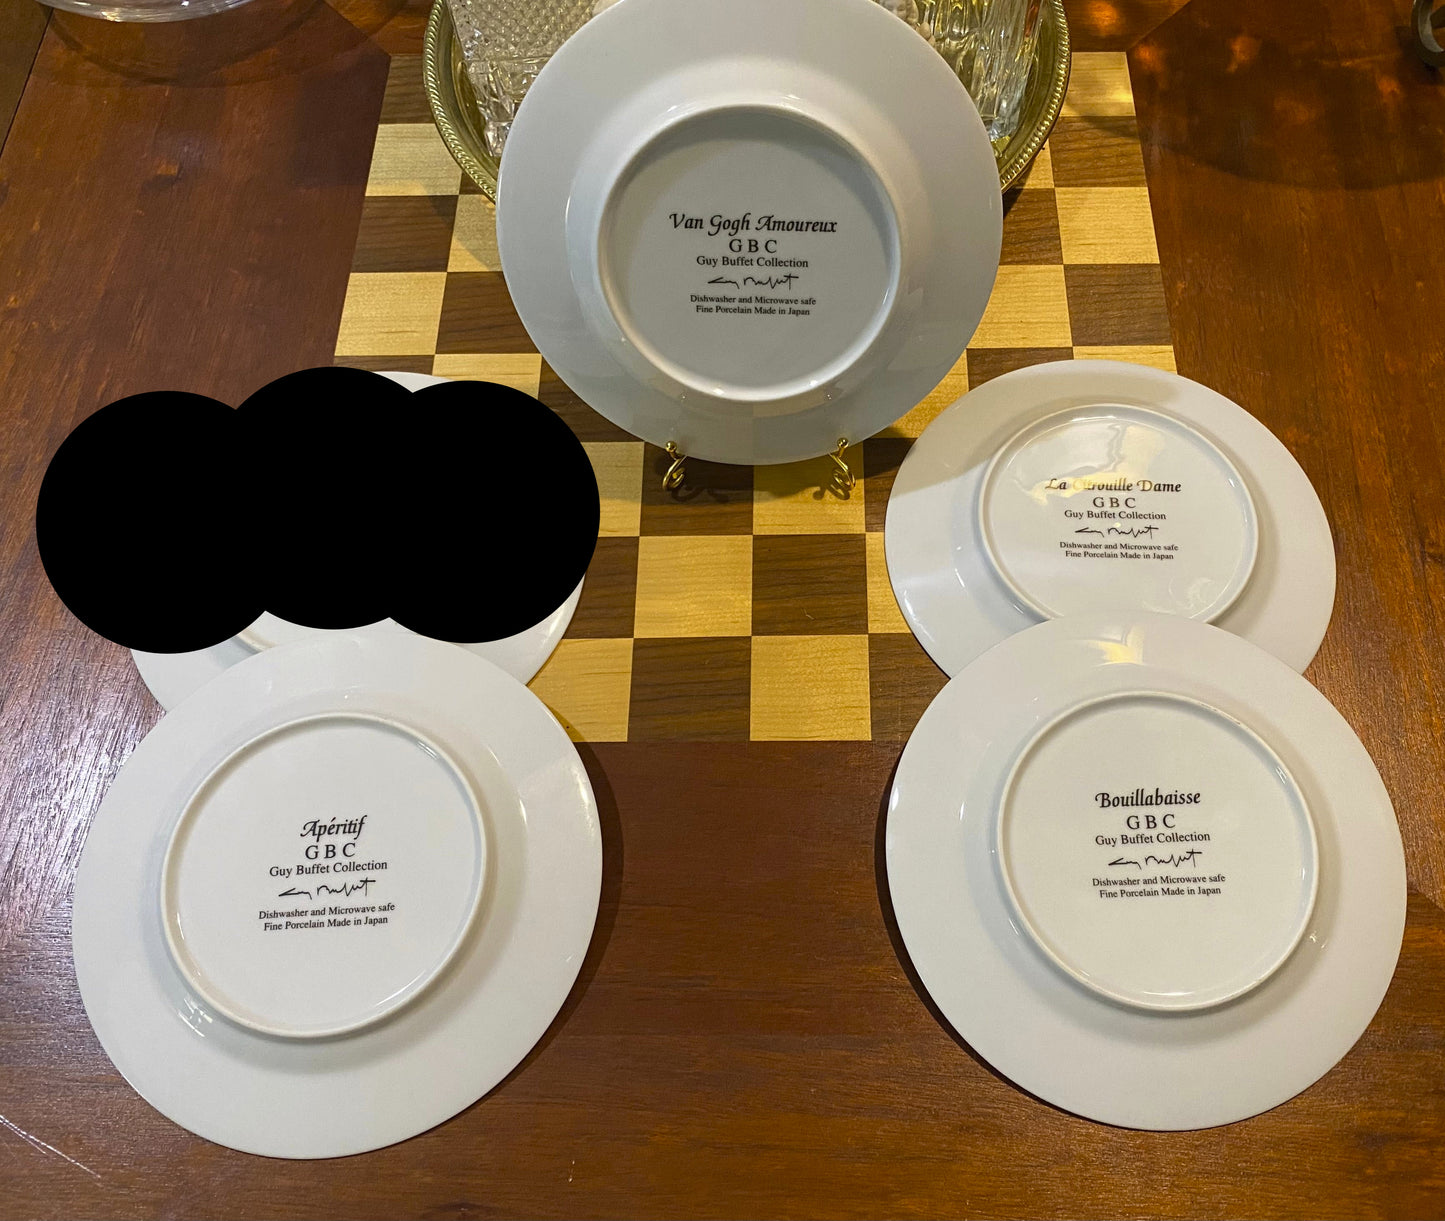 Guy Buffet Collection, Set of 4